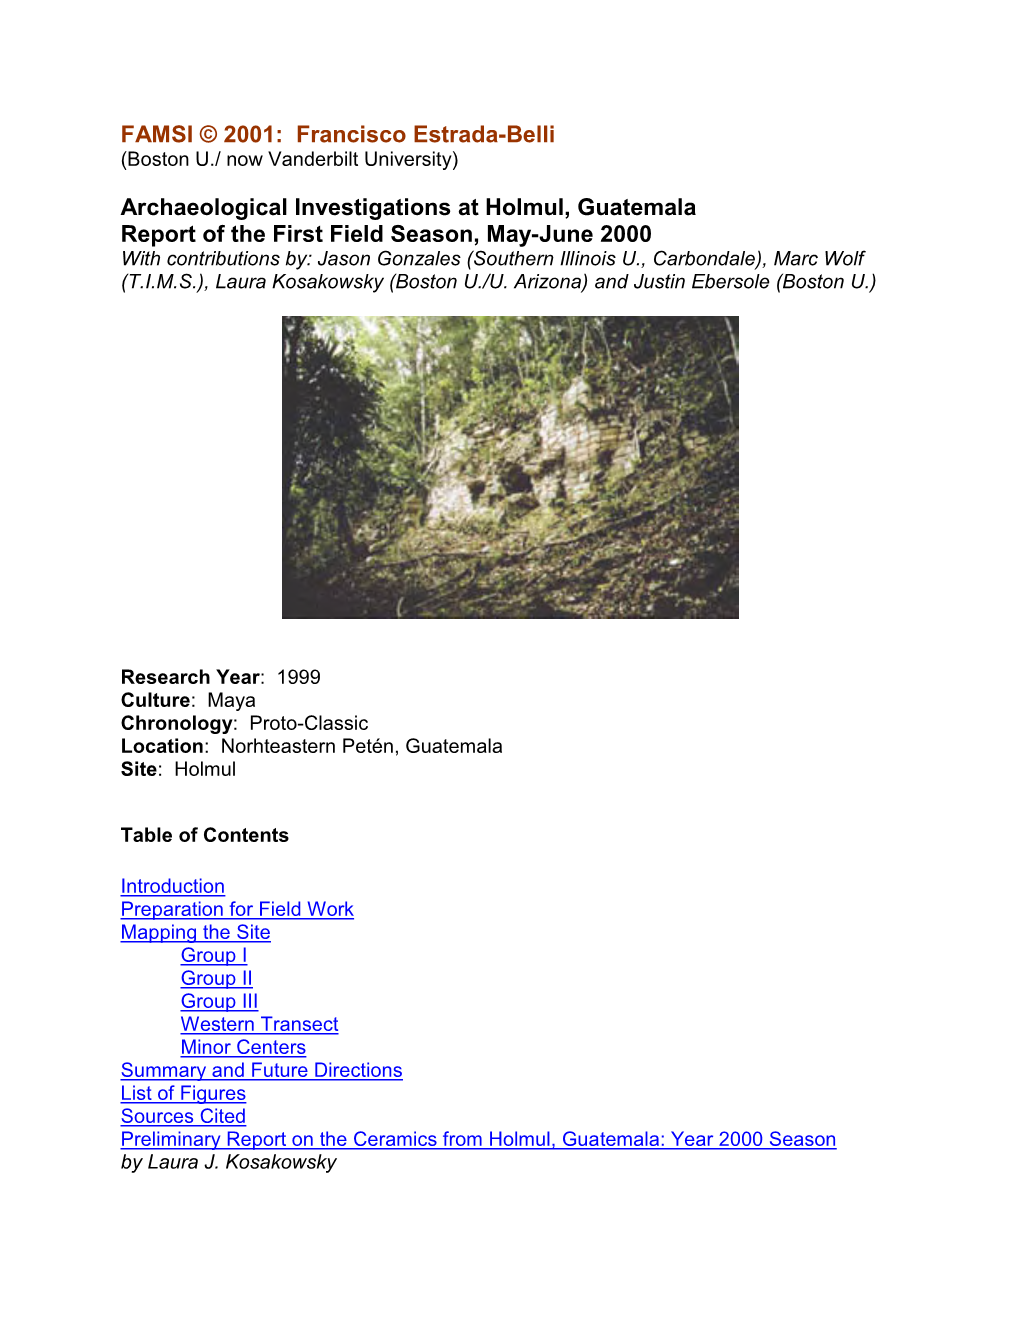 Archaeological Investigations at Holmul, Guatemala Report